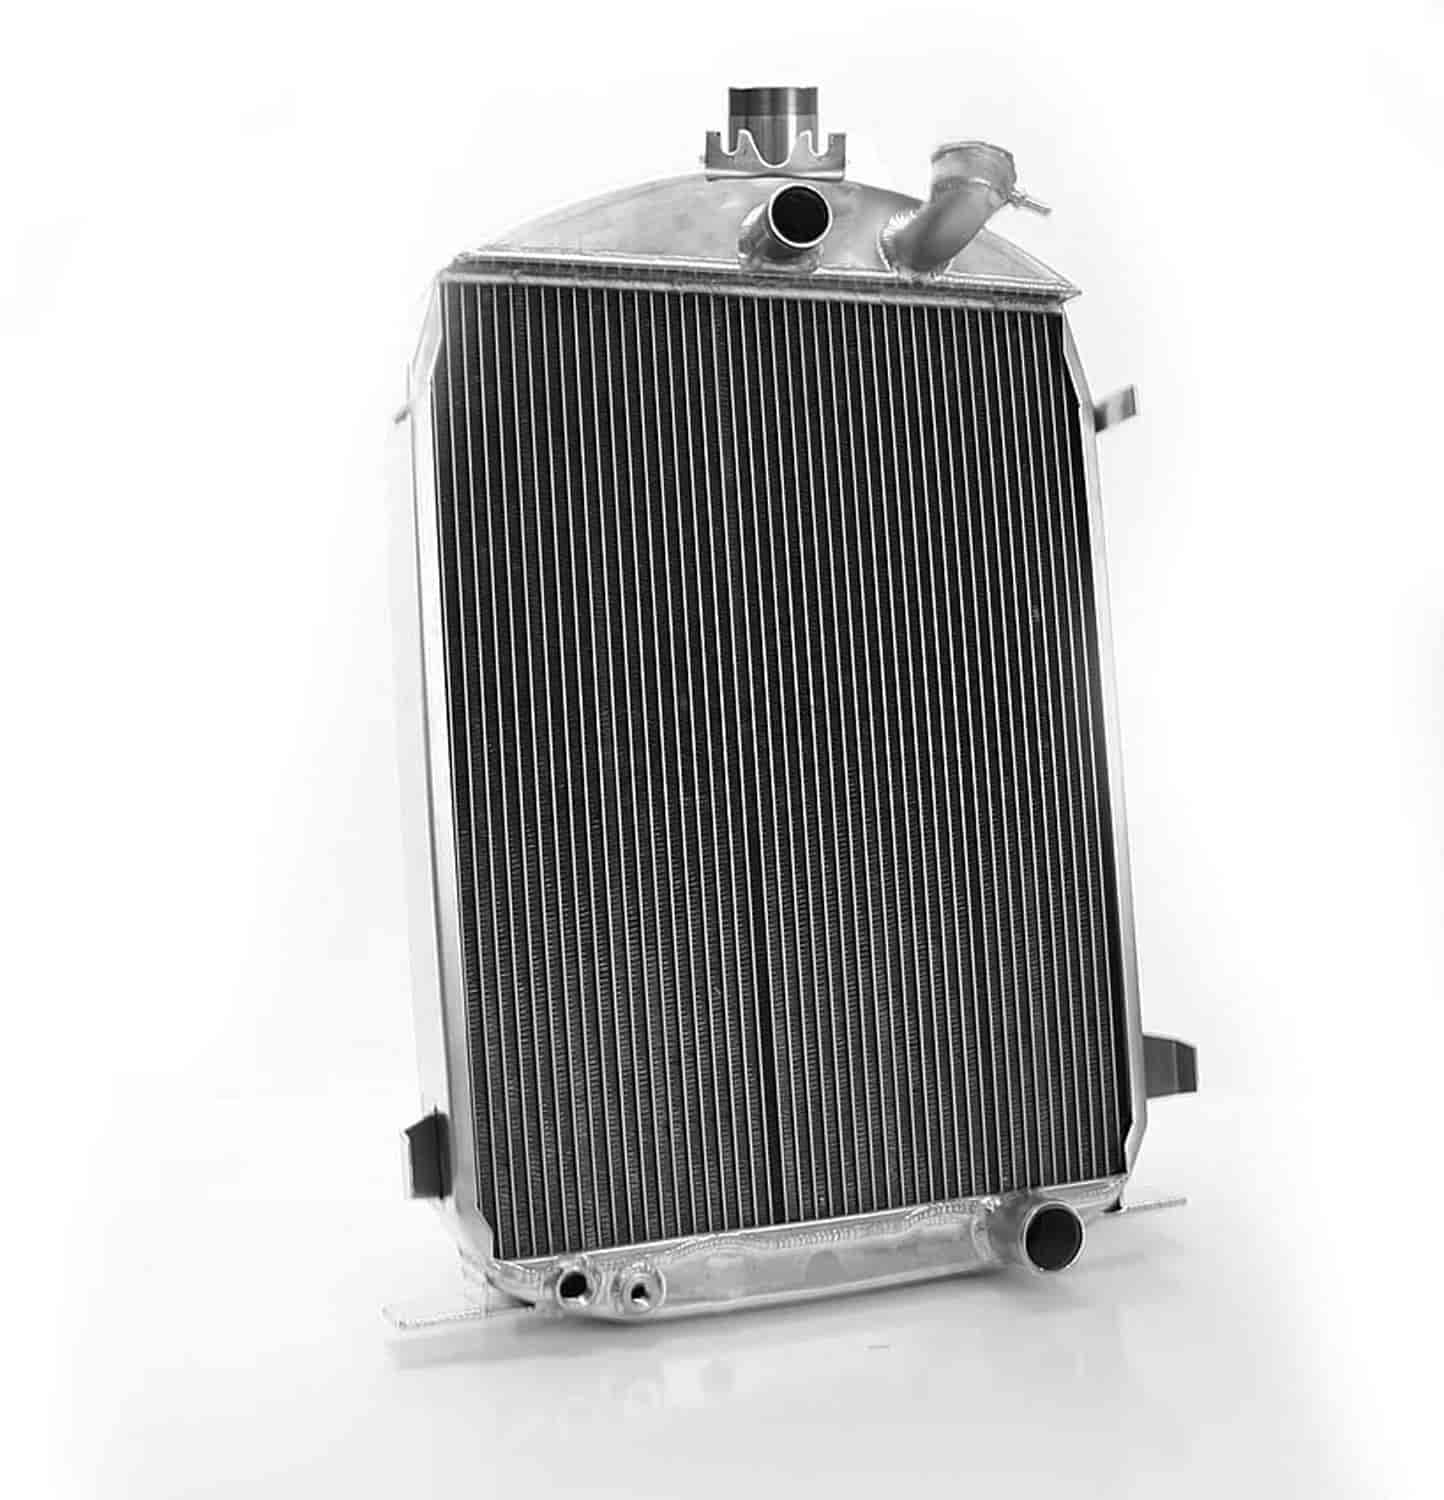 ExactFit Radiator for 1930-1931 Model A with Early GM Engine; Dummy Filler Neck & Hood Rod Options